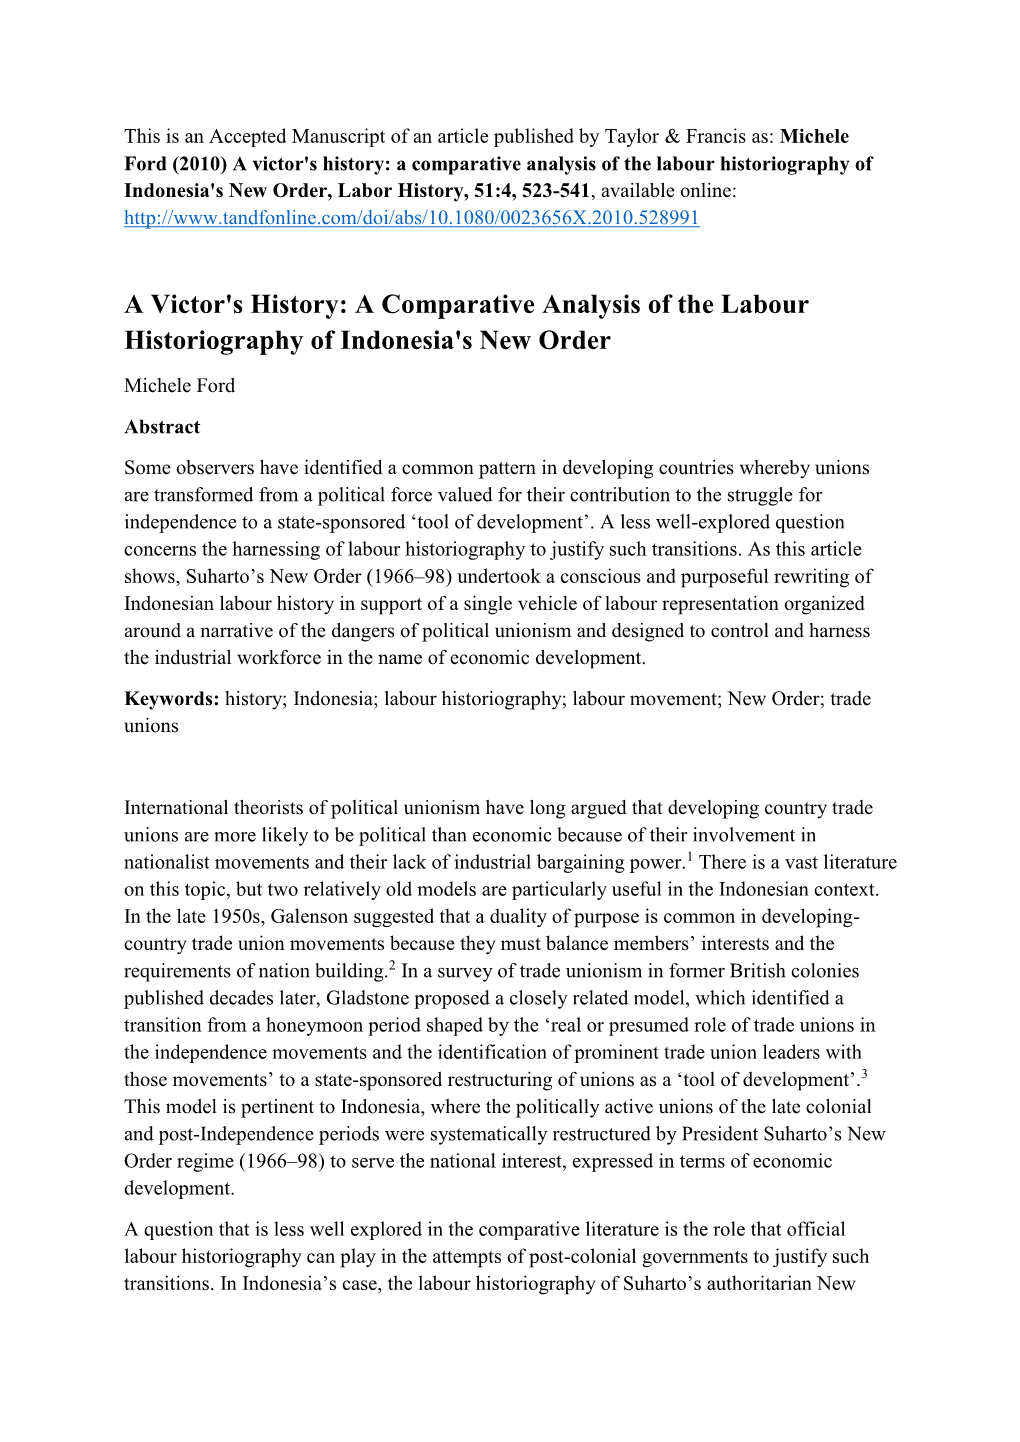 A Victor's History: a Comparative Analysis of the Labour Historiography of Indonesia's New Order